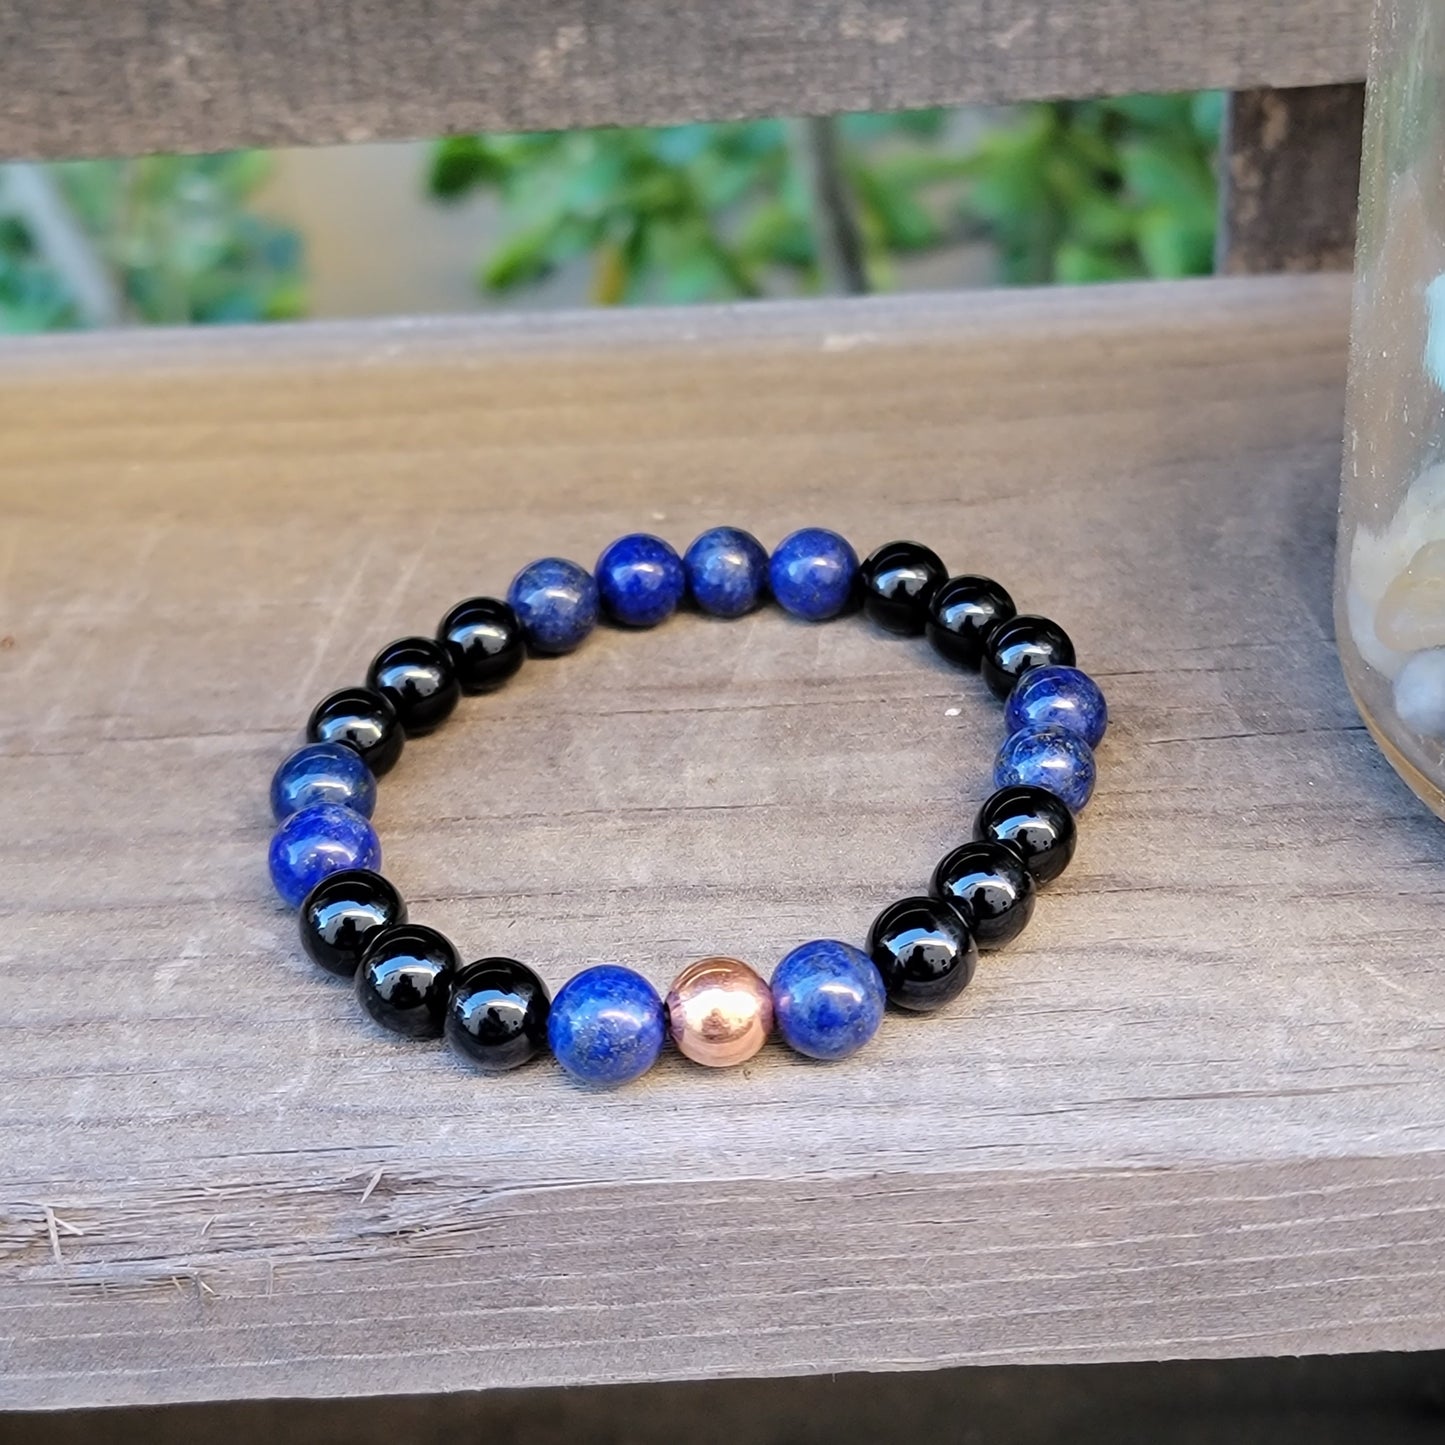 Lapis Lazuli and Black Tourmaline Healing Bracelet with Copper Accents - Protective & Grounding Gemstone Jewelry